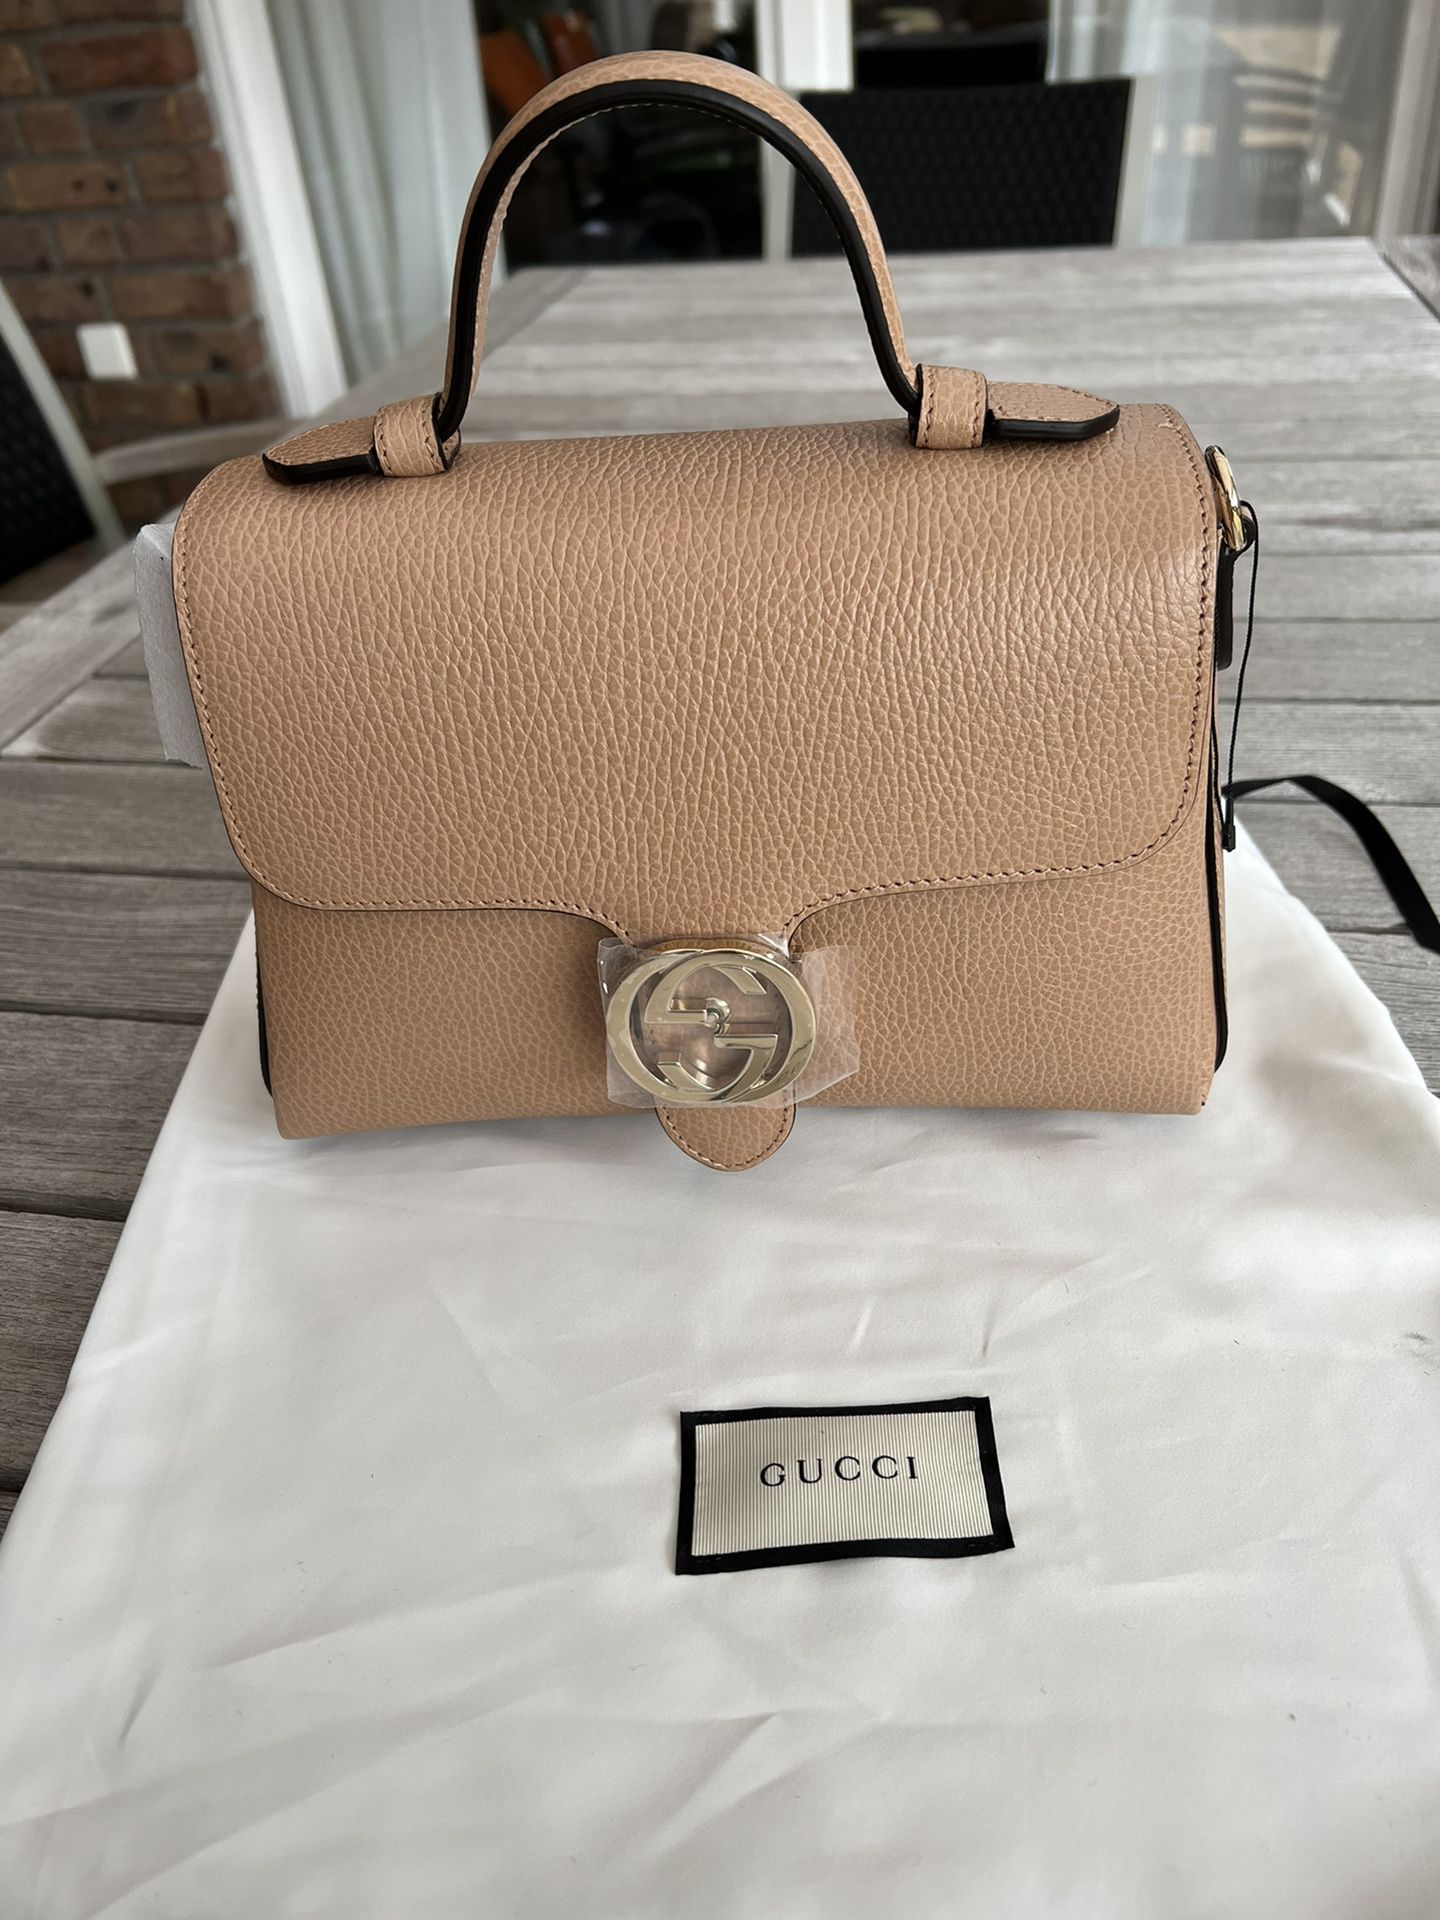 NEW Gucci Handbag Europe) for Sale in Fort Worth, TX - OfferUp